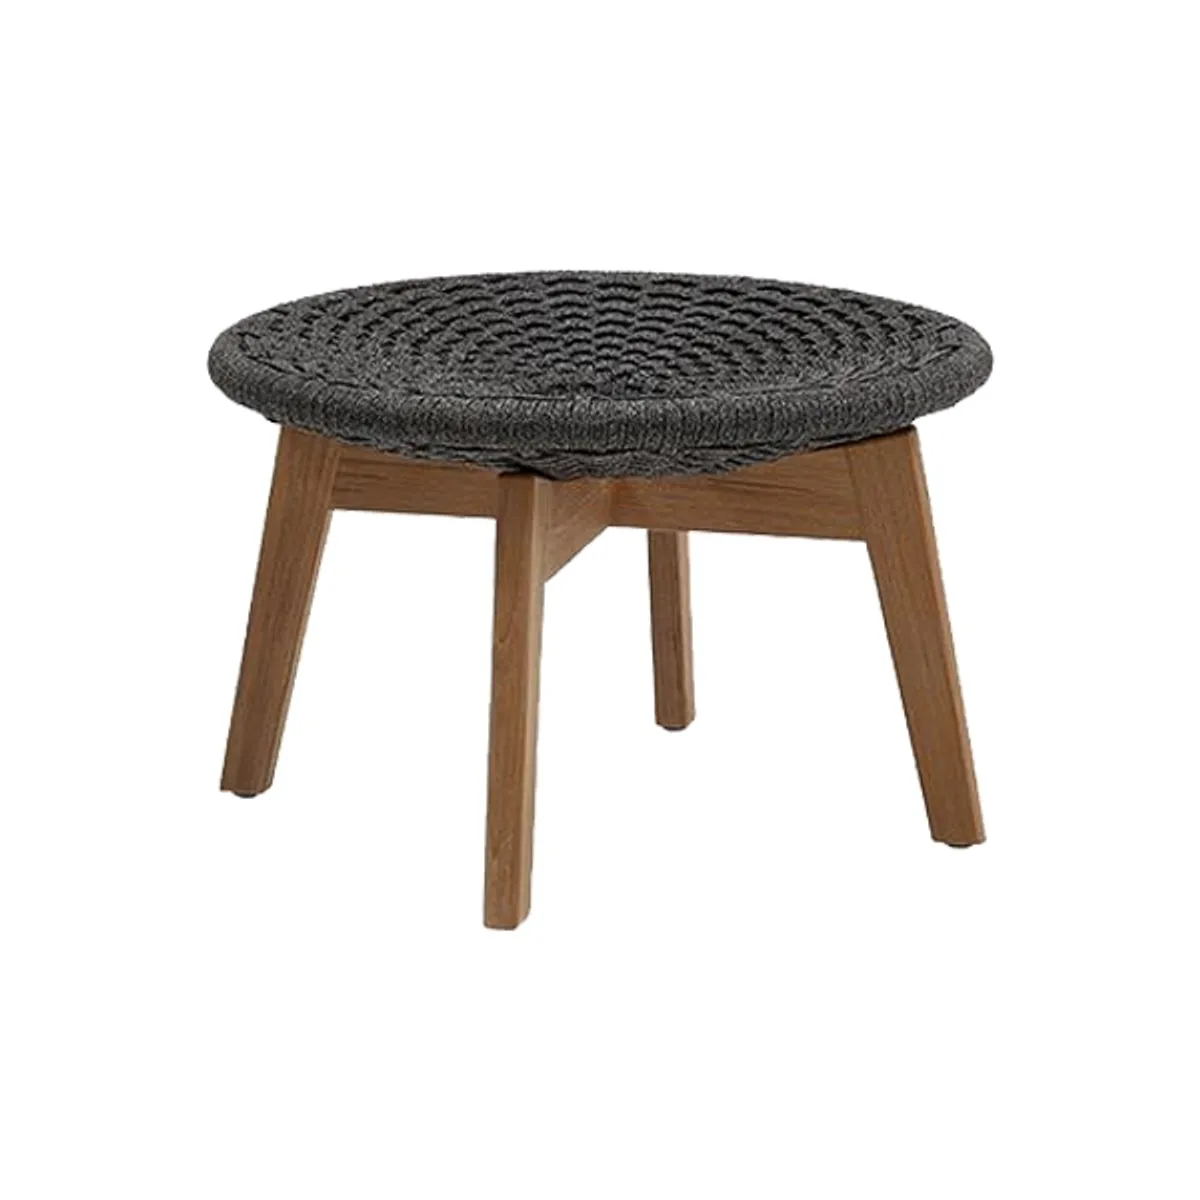 Persy rope stool Peacock rope stool